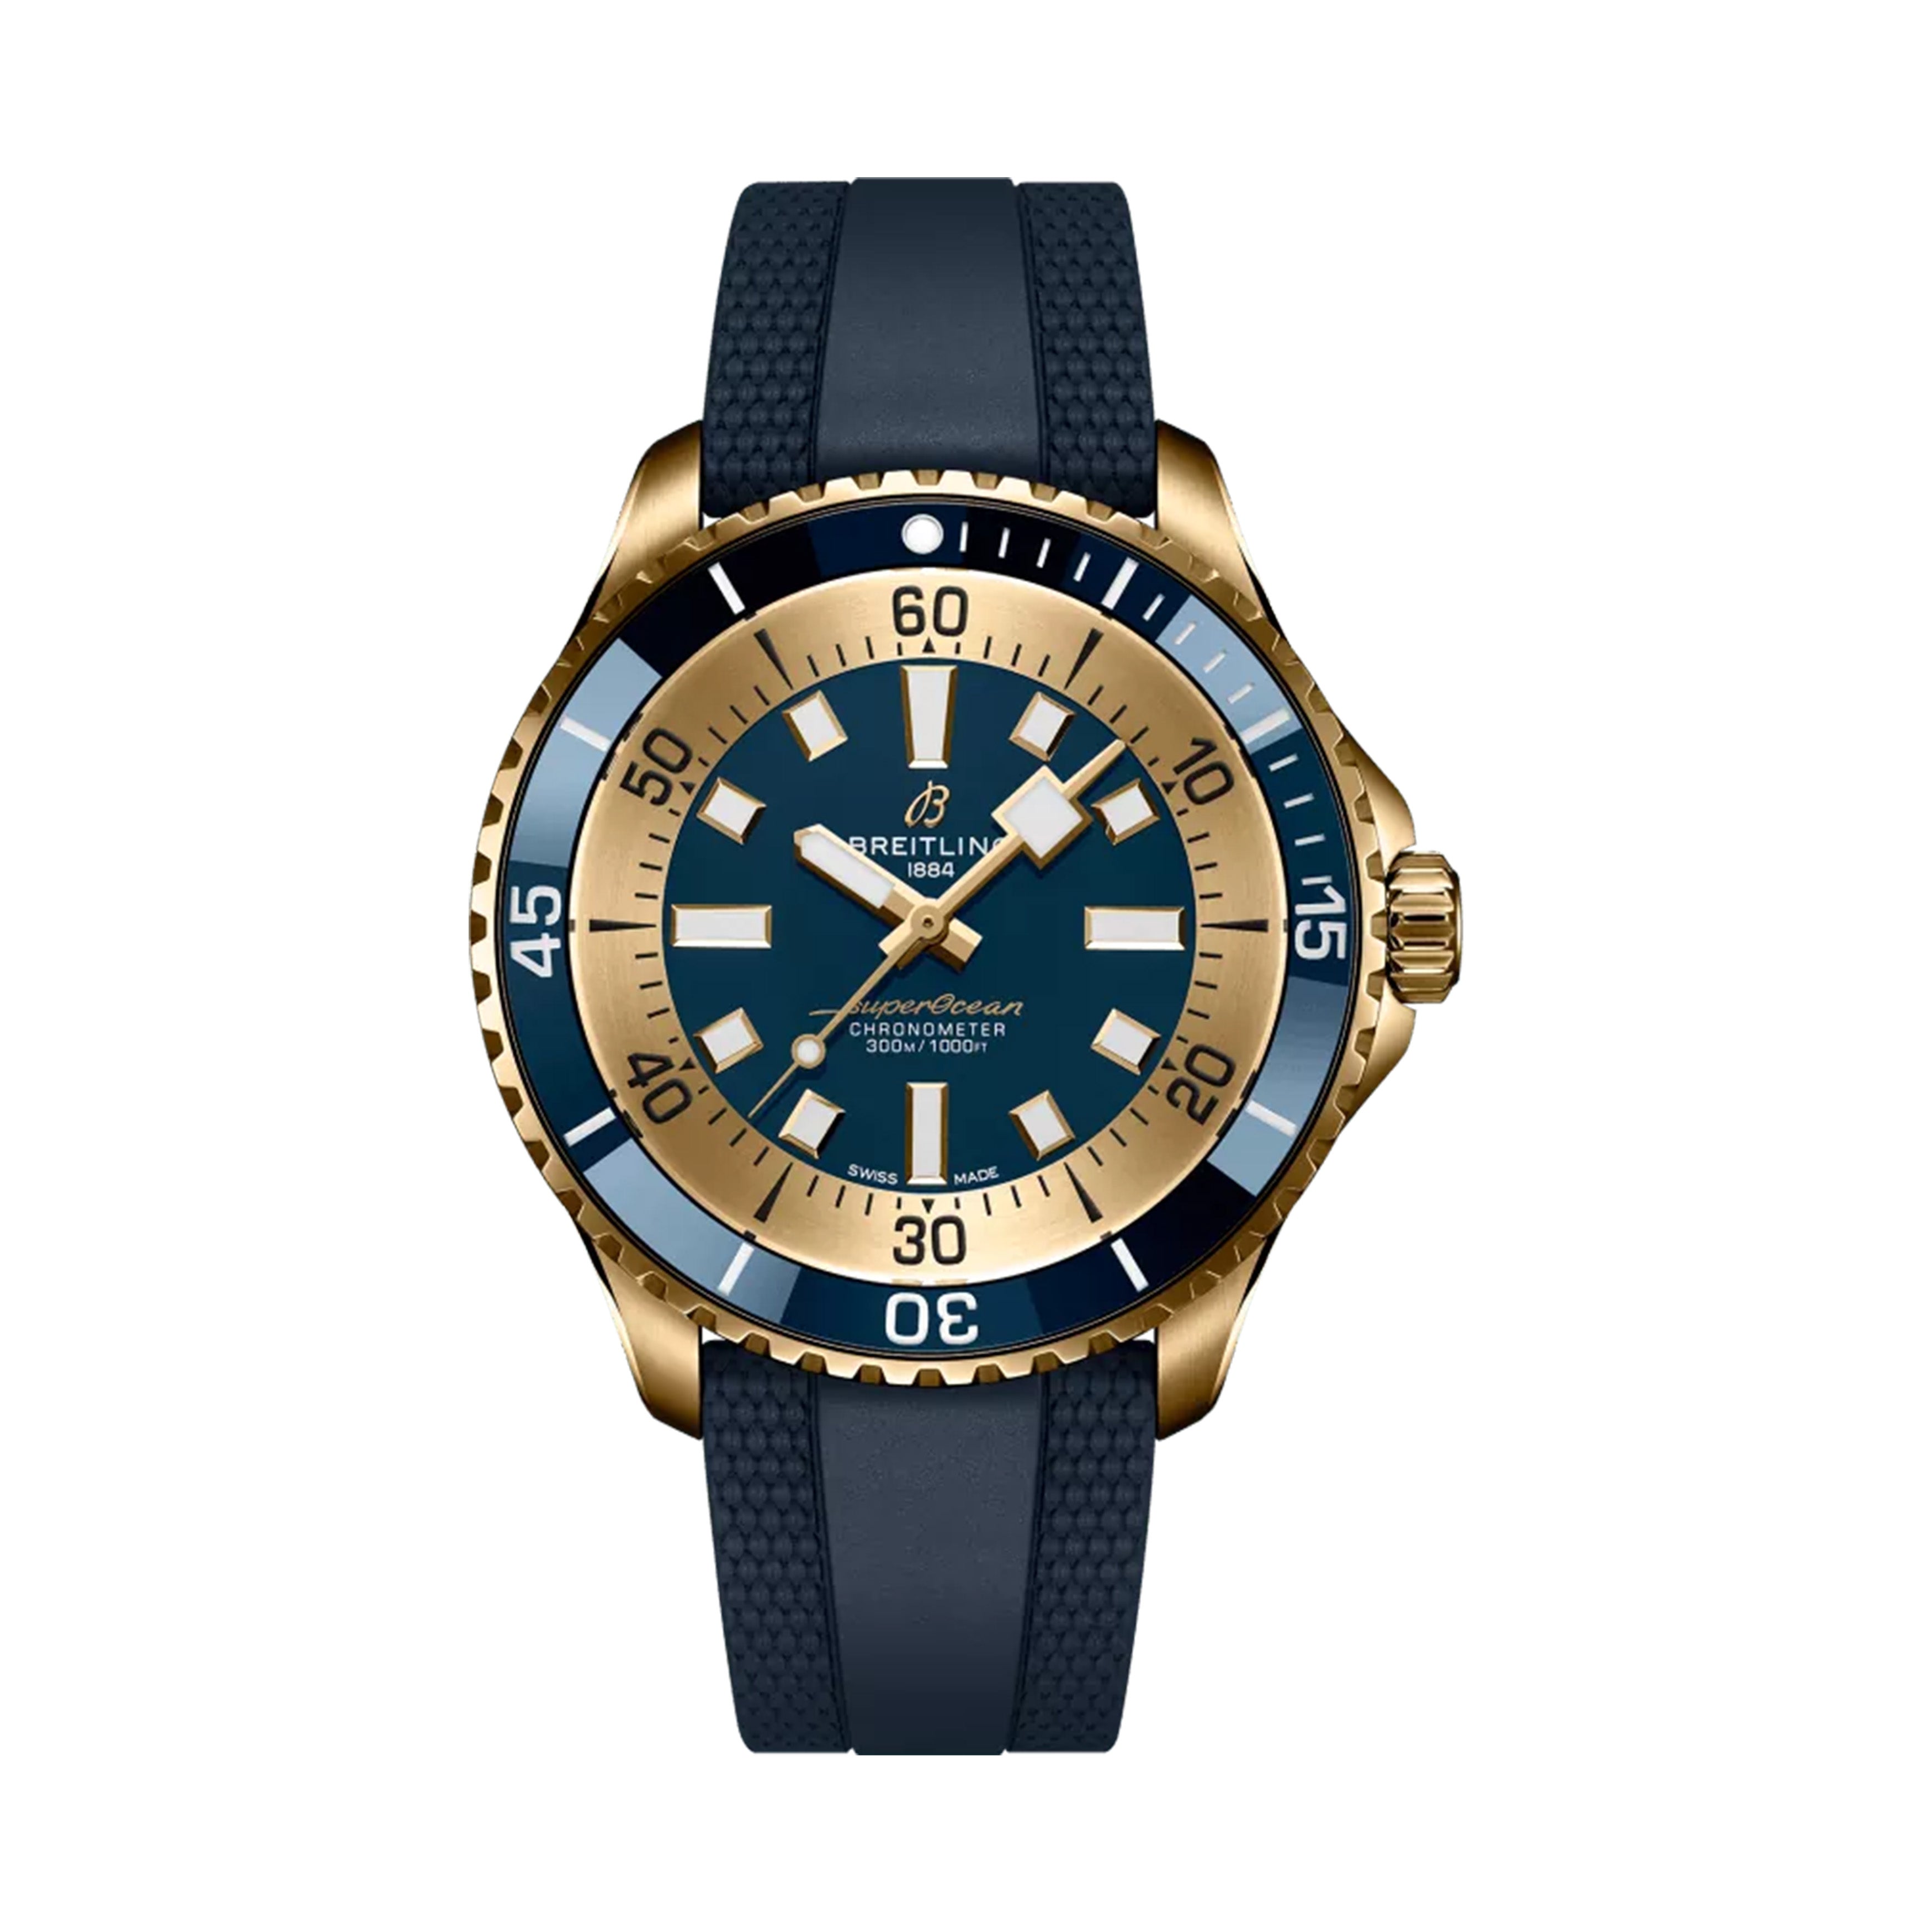 Breitling Superocean Automatic 44 North American Exclusive Watch, 4mm Blue Dial, N173761A1C1S1